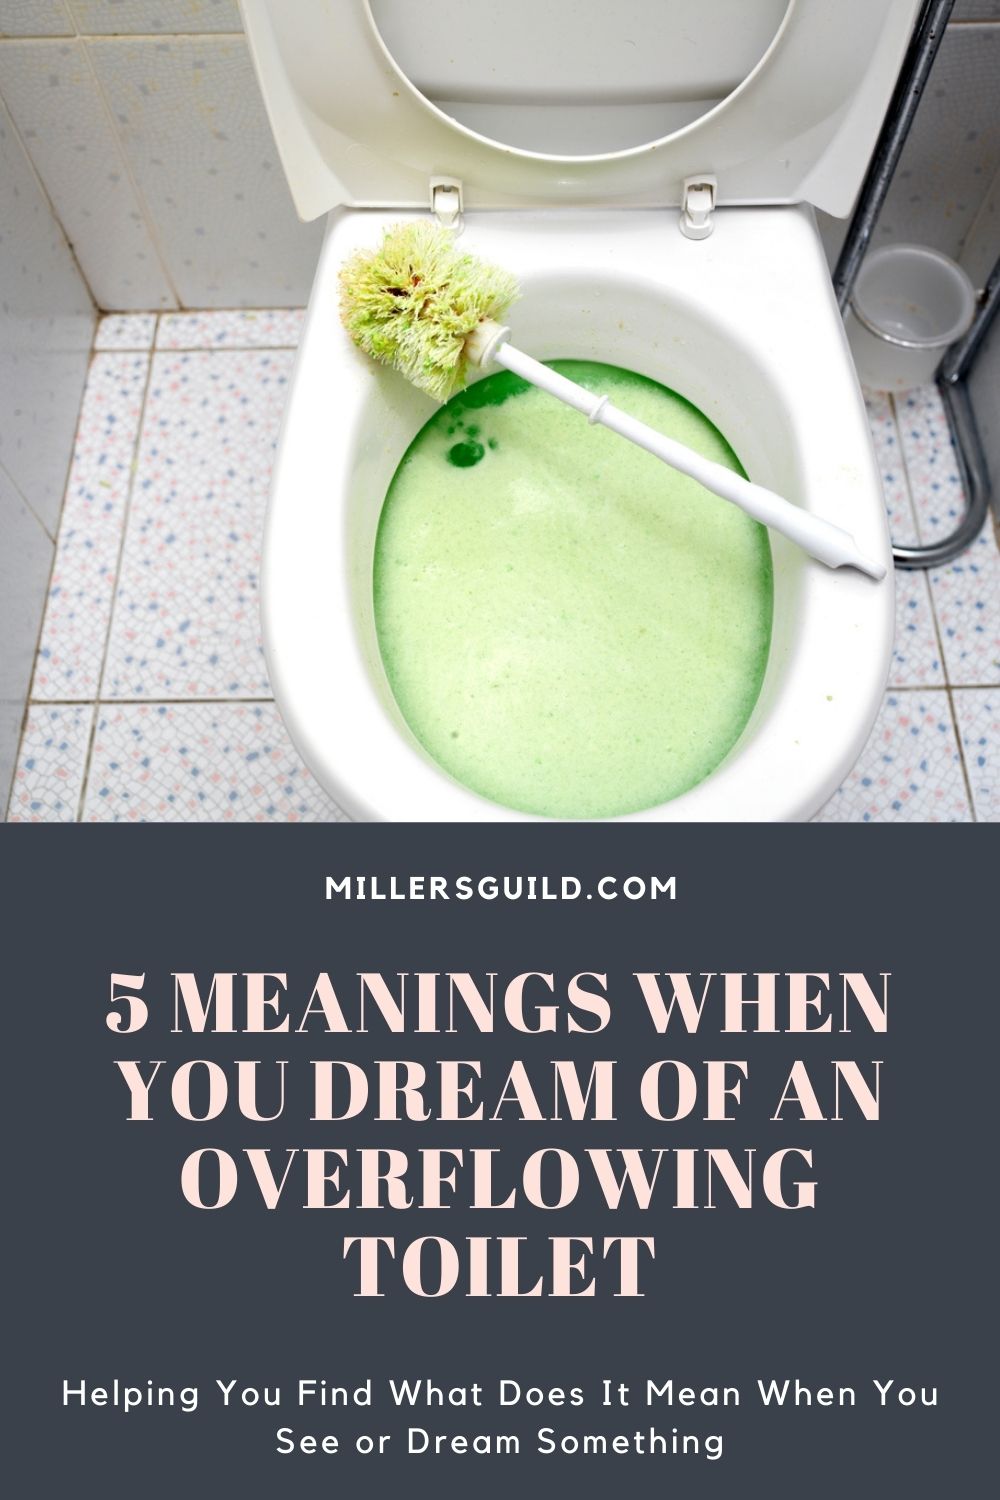 5 Meanings When You Dream of an Overflowing Toilet 2